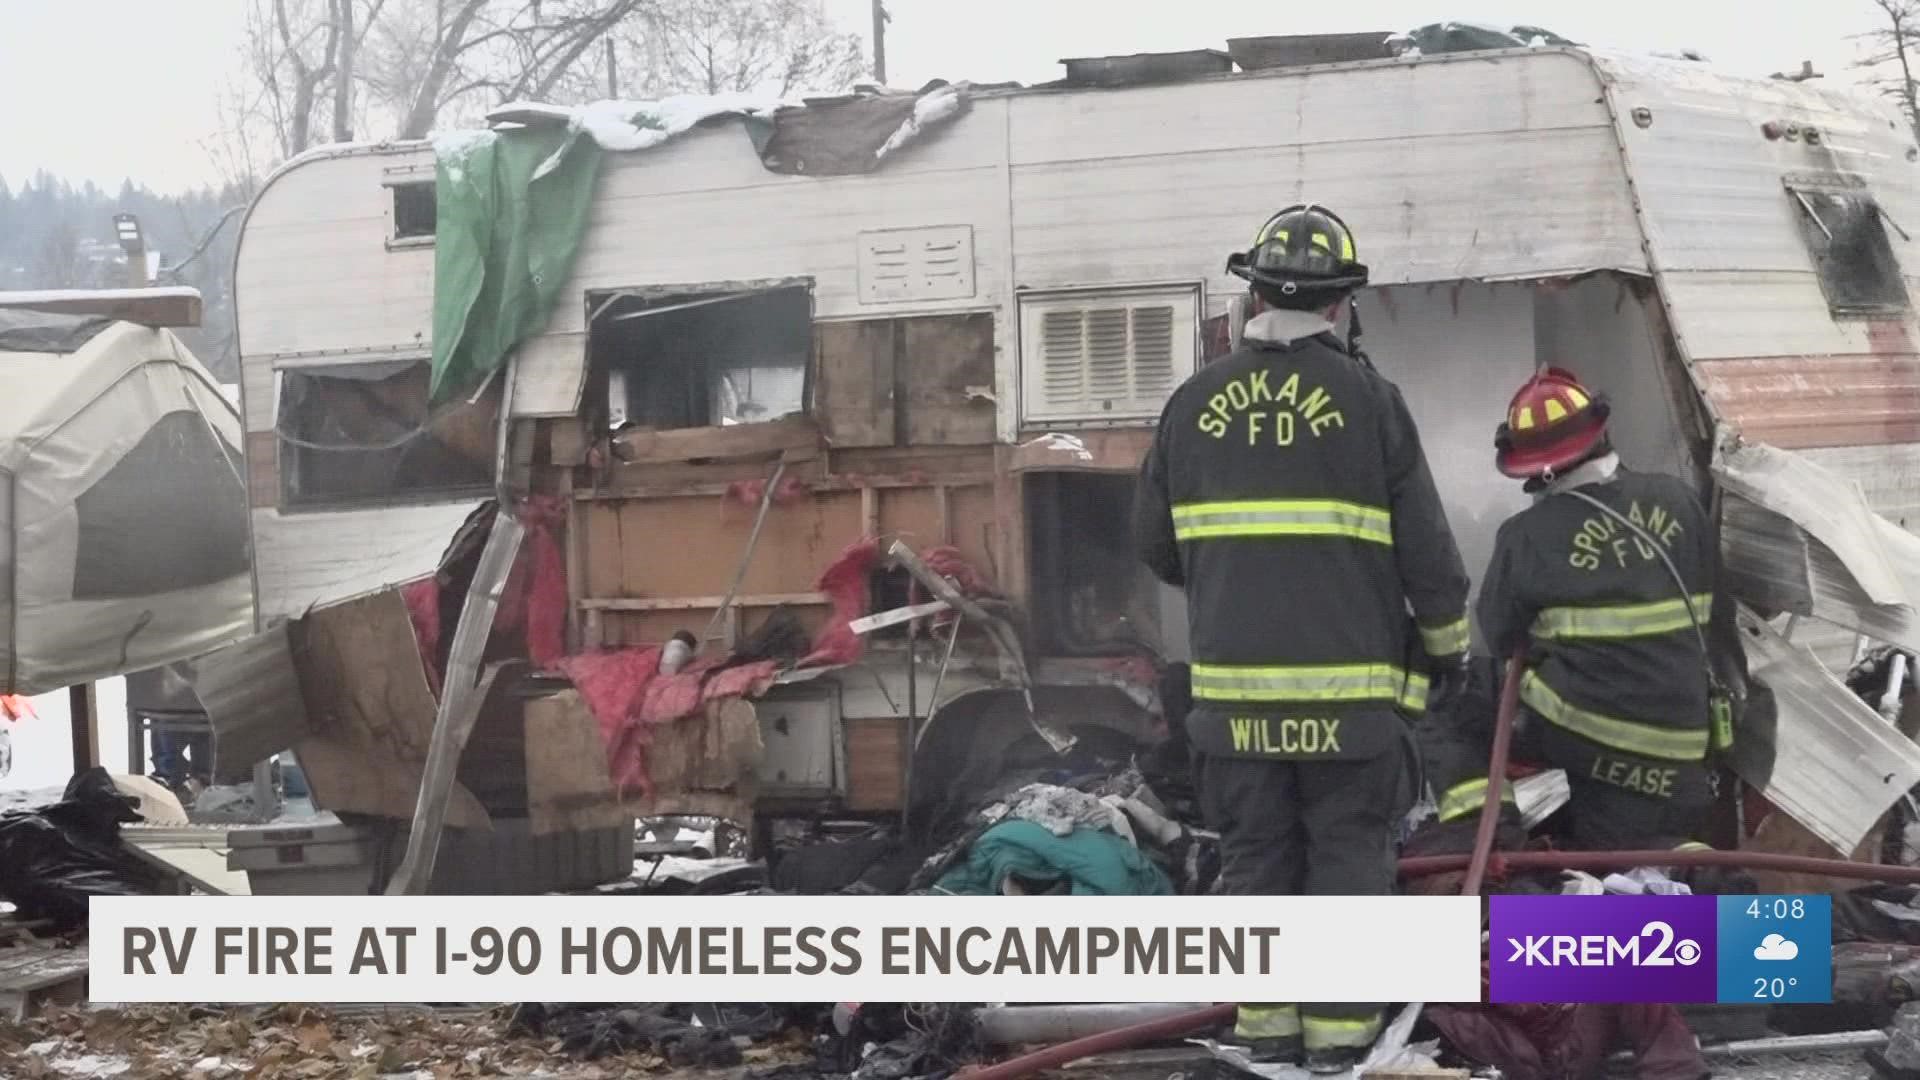 Jewels Helping Hands Executive Director Julie Garcia told KREM 2 the homeless camp is not being evacuated at this time.